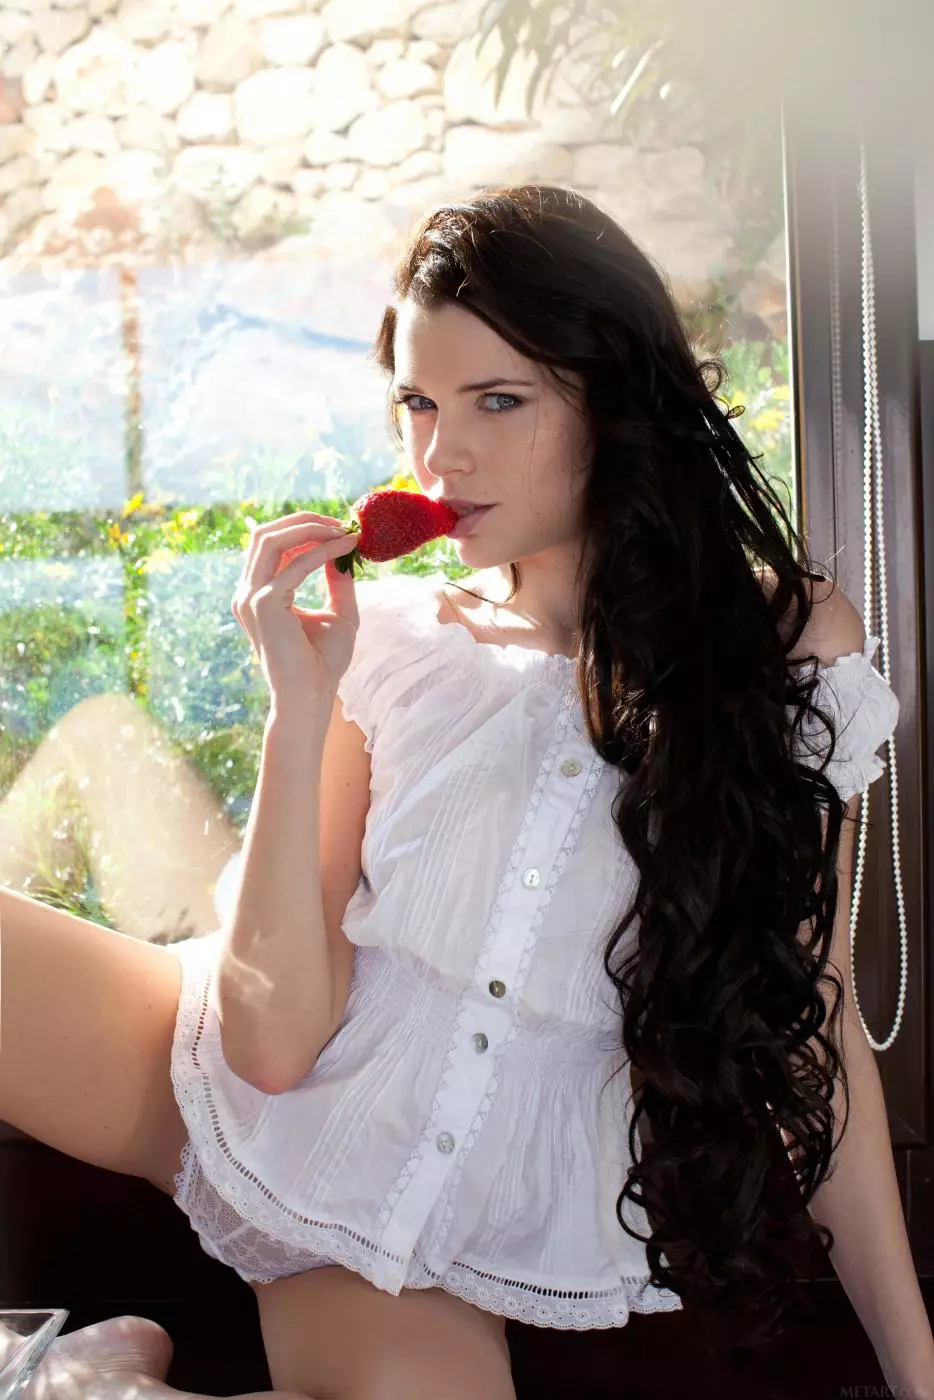 Baring her sexy white clothes hot brunette Valeria A poses and eats strawberries